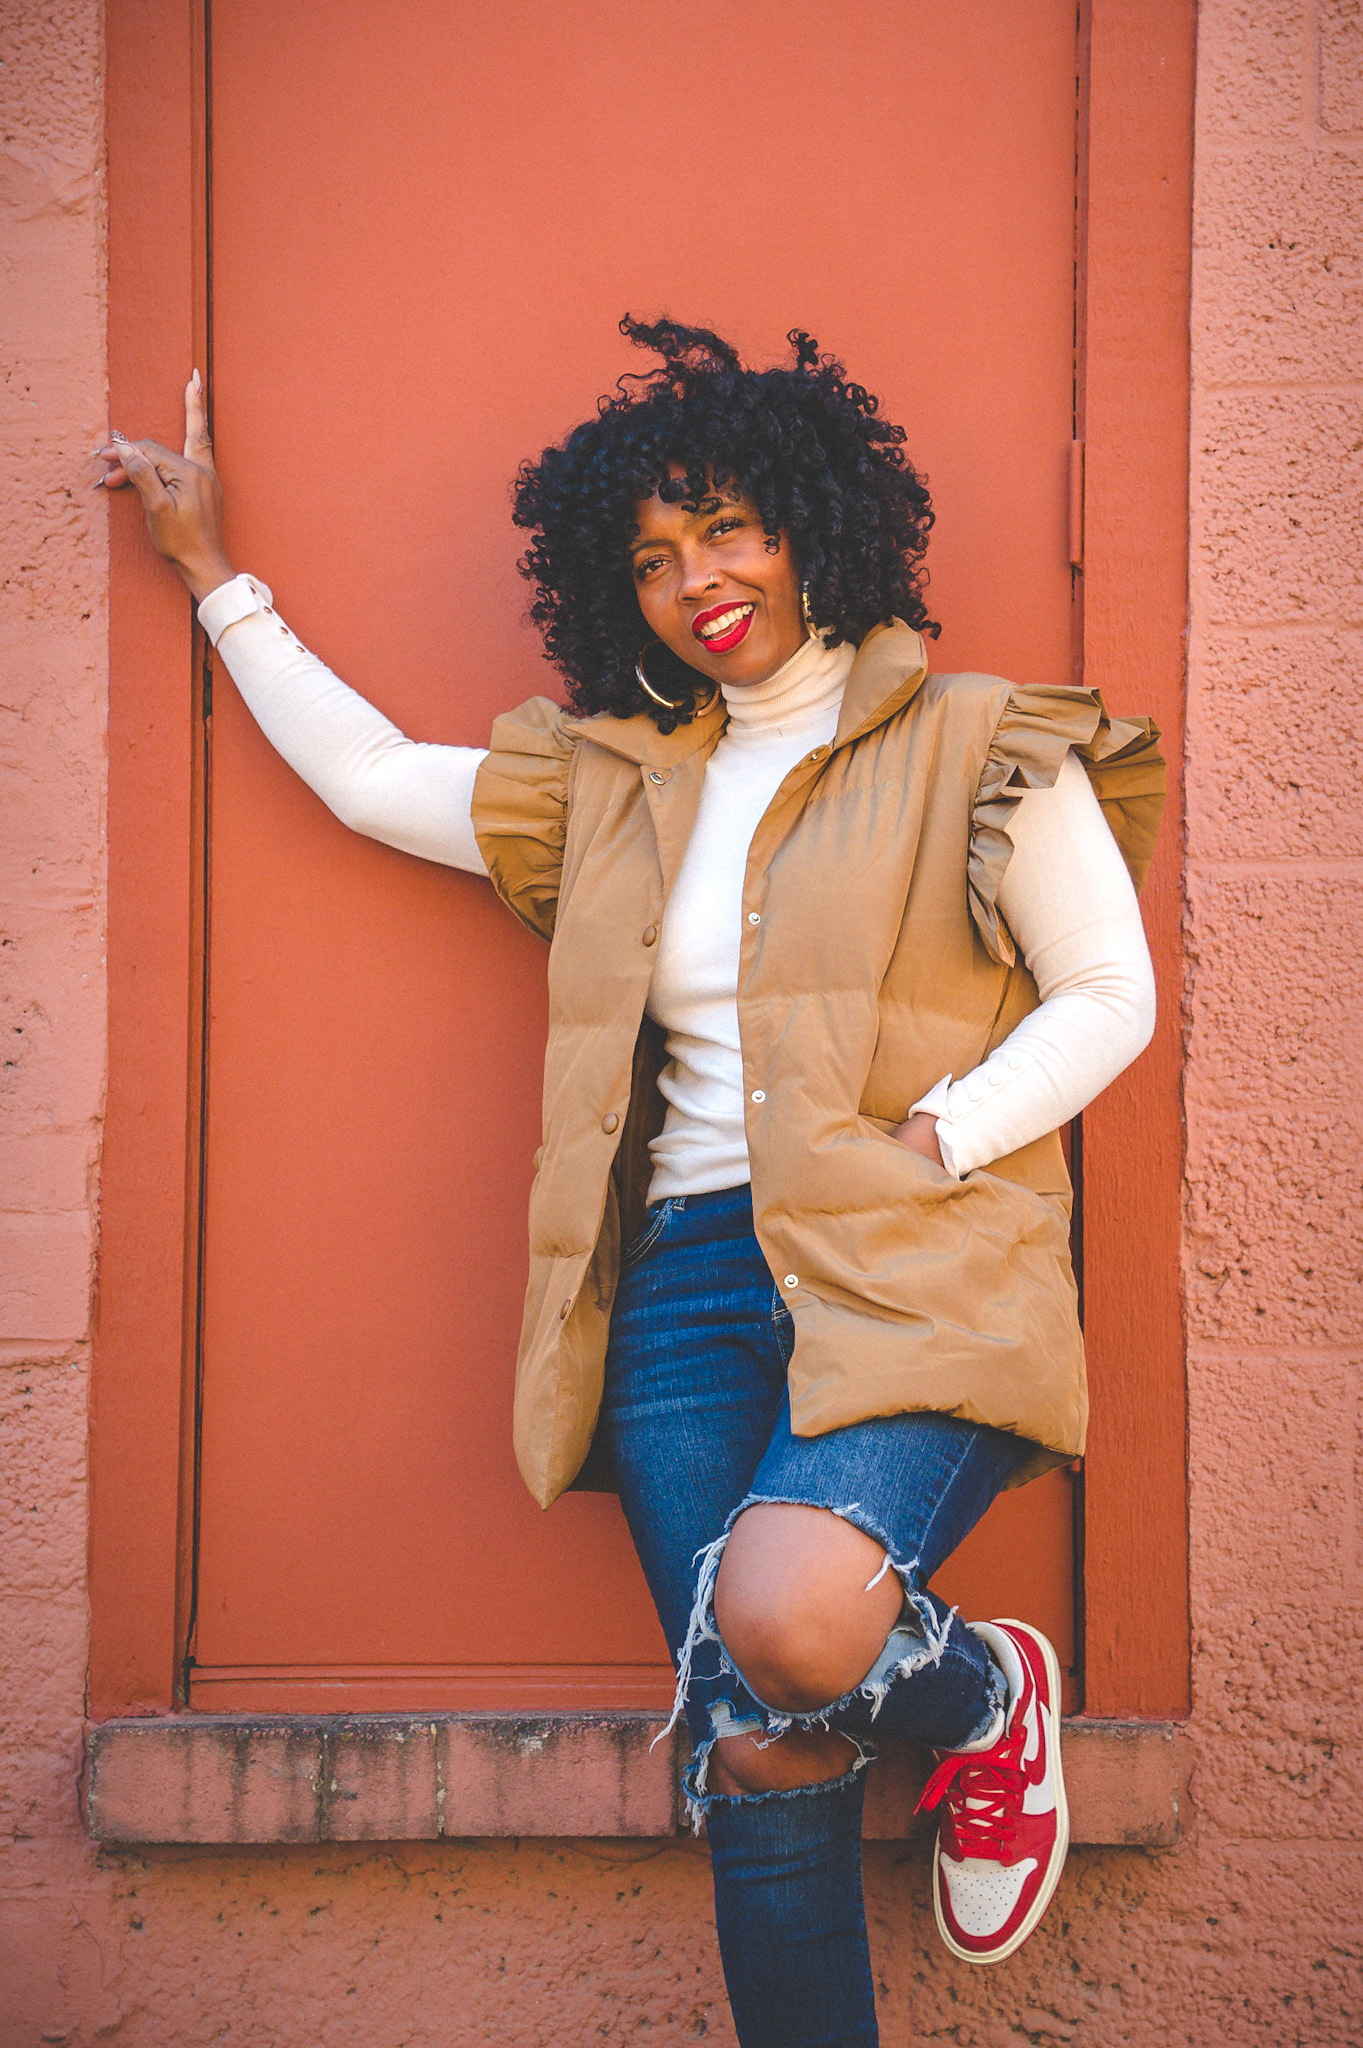 SWEENEE STYLE, HOW TO DRESS FOR WINTER, HOLIDAY 2022 OUTFIT IDEAS, EASY OUTFIT IDEAS, RECREATE OUTFITS, BLACK GIRLS WHO WEAR JORDANS, HOW TO STYLE NATURAL HAIR, INDIANAPOLIS FASHION BLOG, INDIANA STYLE BLOG